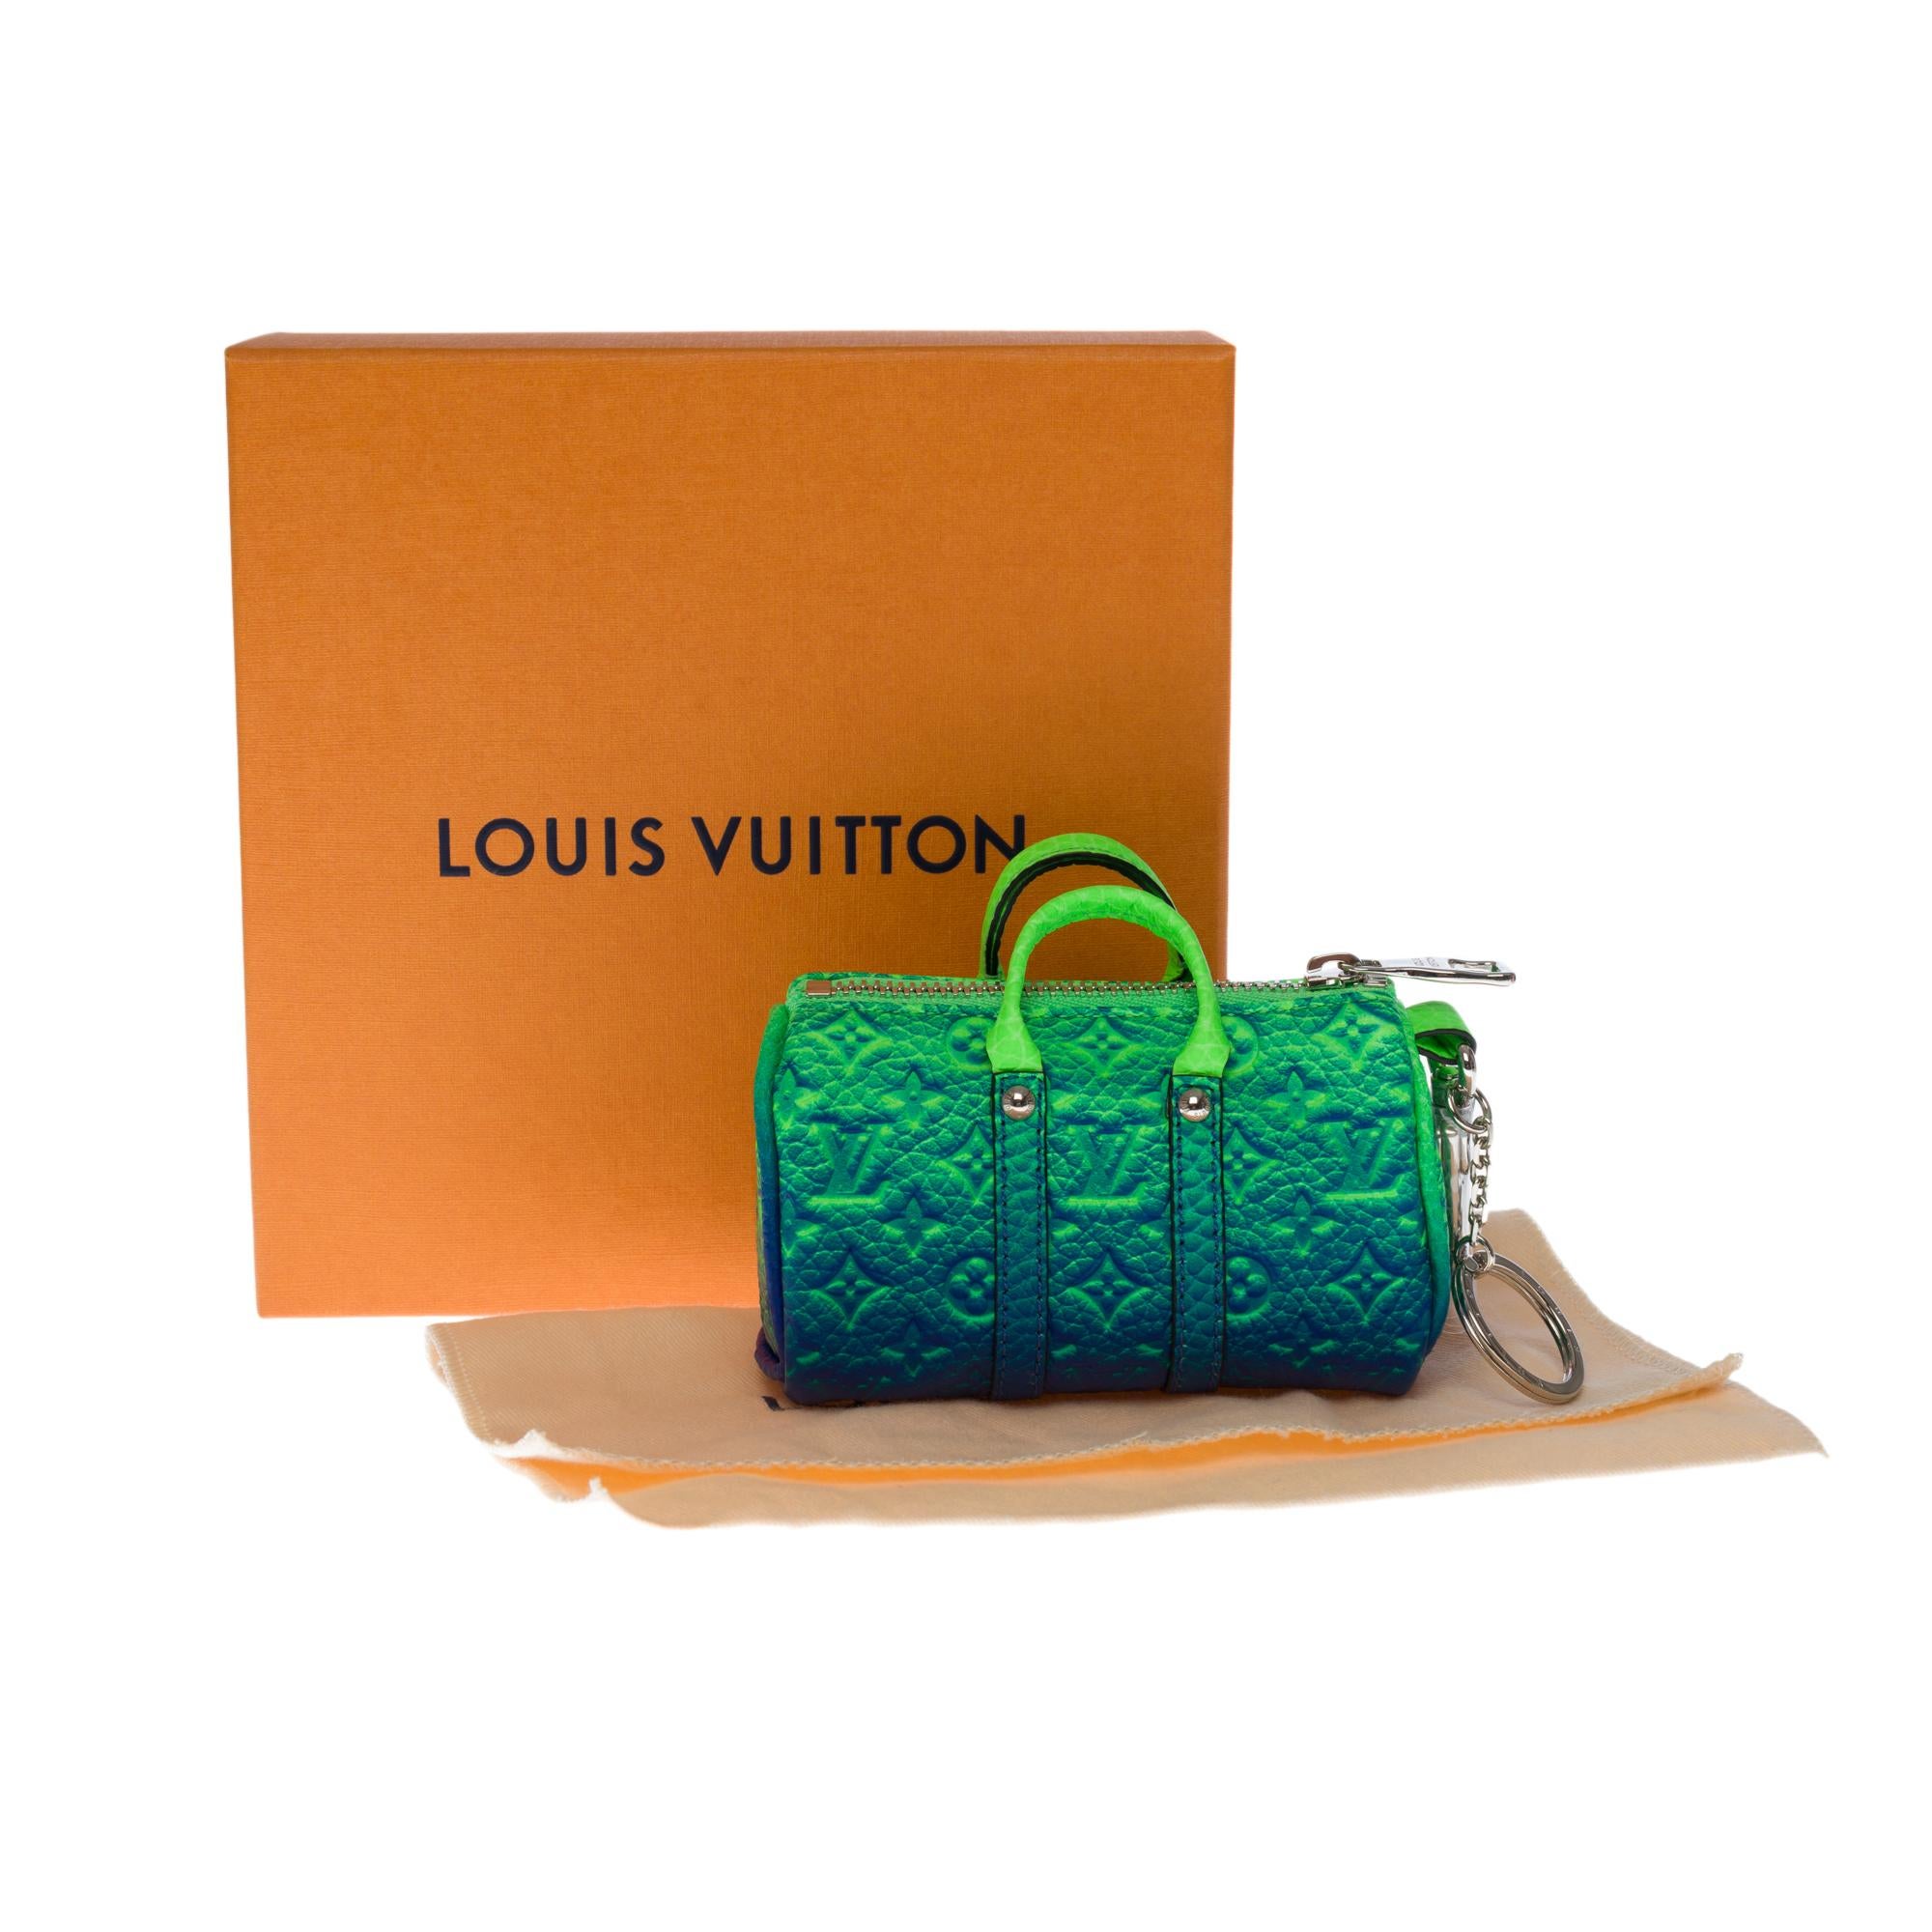 NEW-Louis Vuitton keepall 50 strap Travel bag Spray in green leather / V. Abloh 6